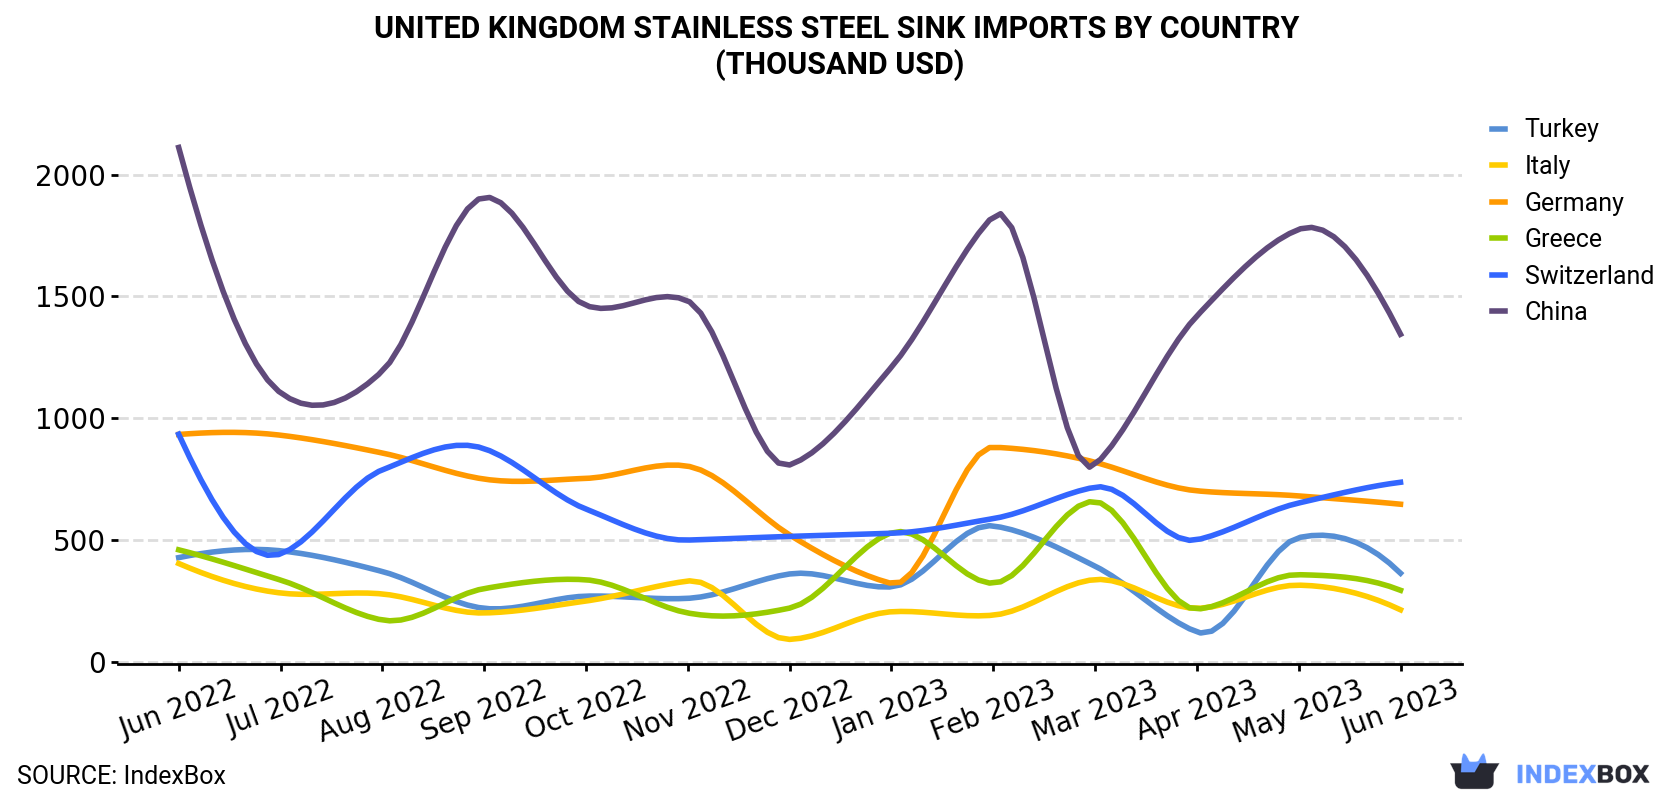 United Kingdom Stainless Steel Sink Imports By Country (Thousand USD)